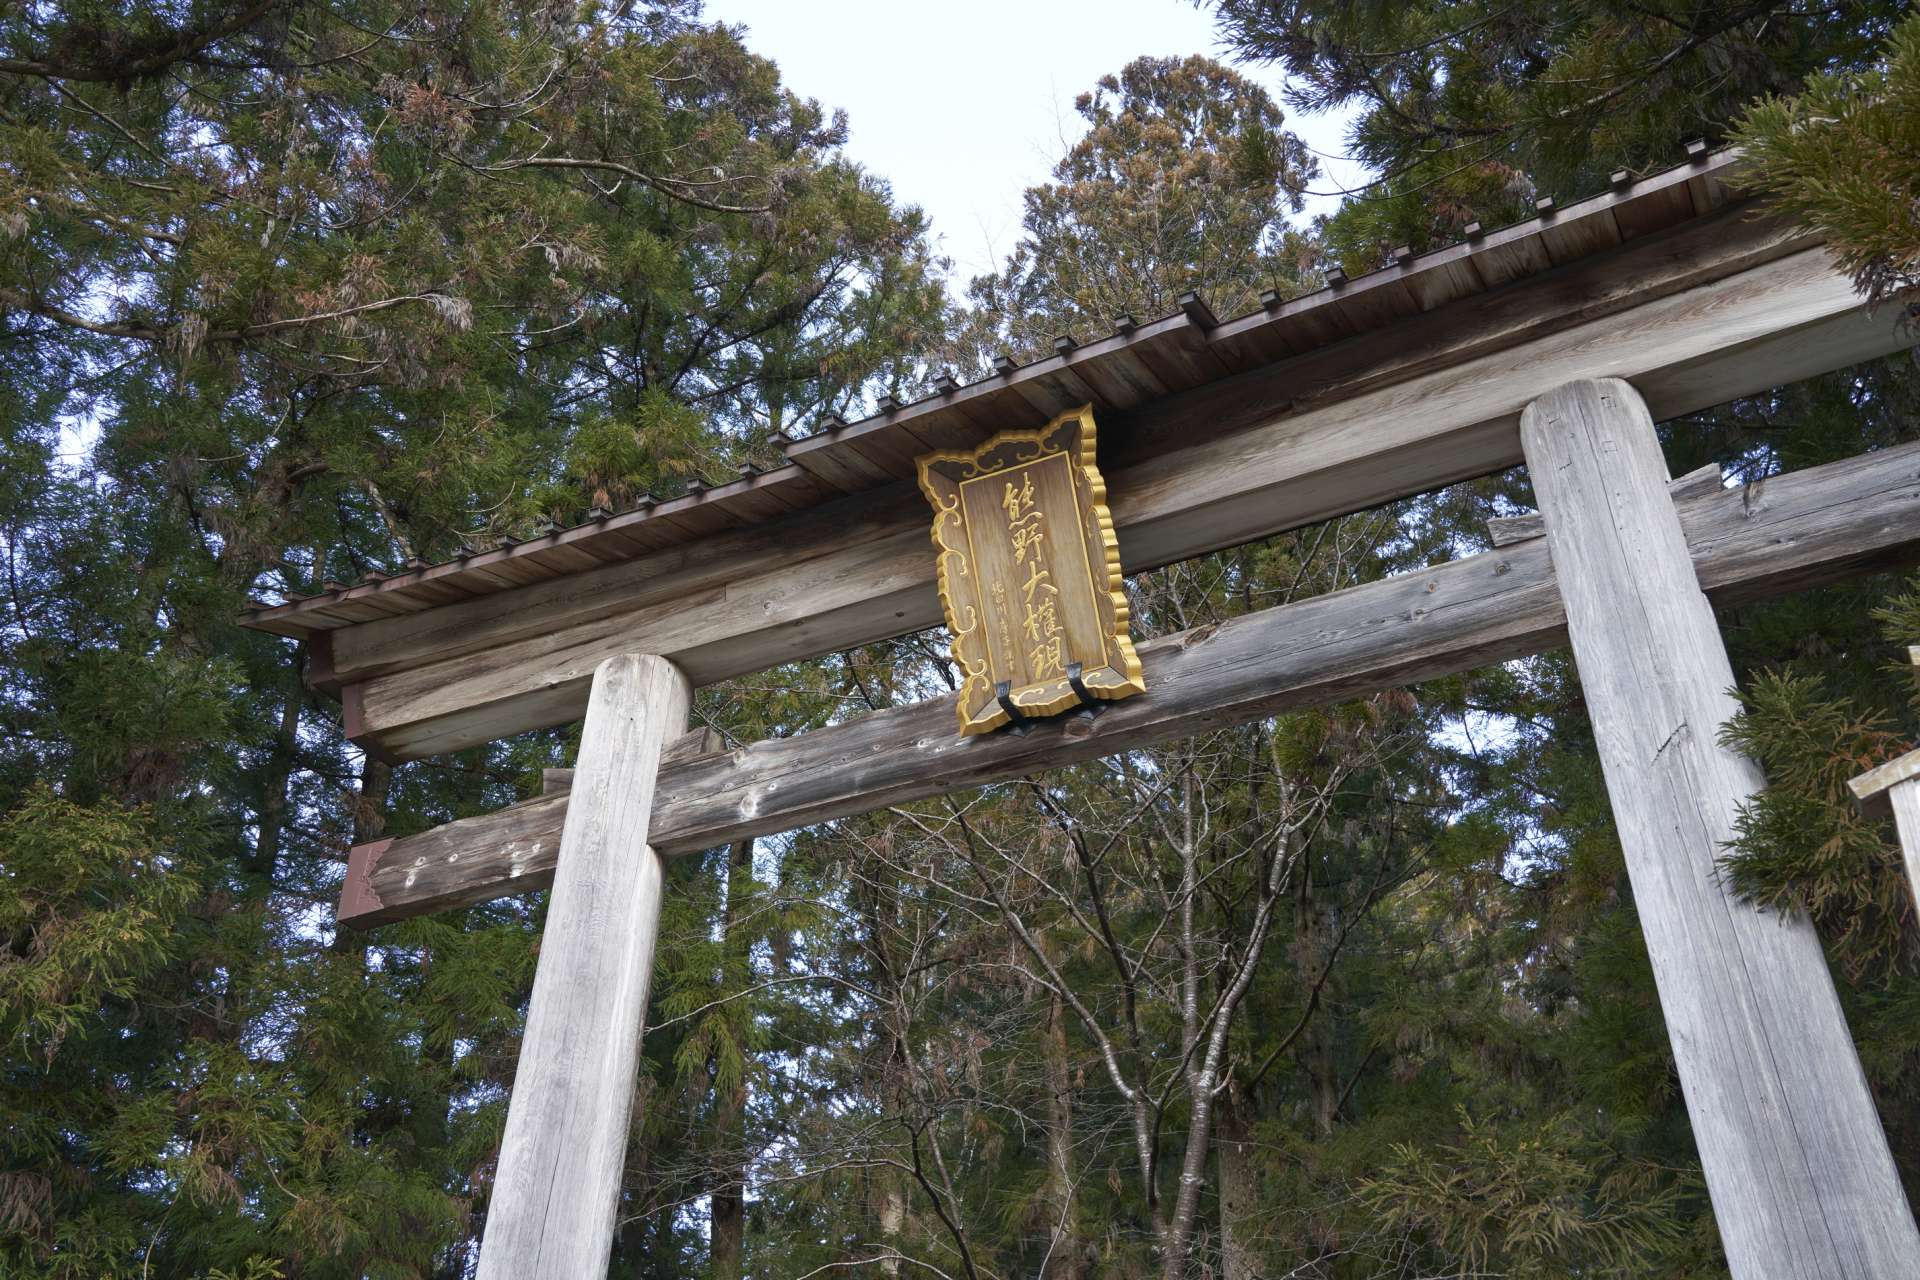 The words “Kumano Daigongen” are inscribed on the plaque that hangs above the grand torii gate at the main approach to Kumano Hongu Taisha. 
This indicates how crucial the idea of “gongen” is to the Kumano faith.